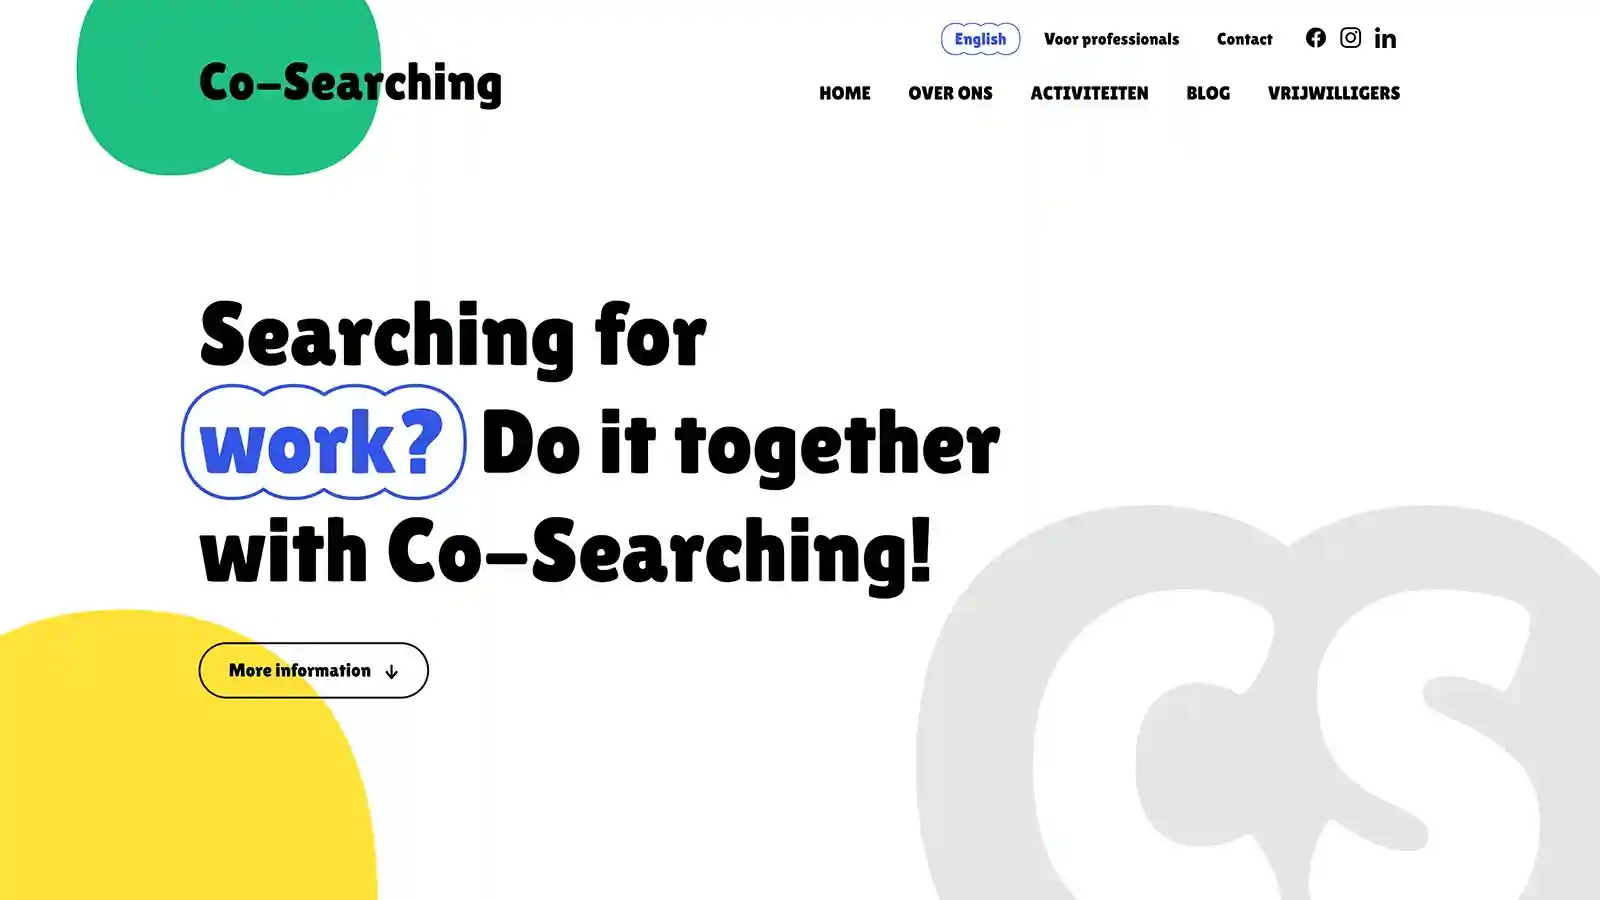 Co-Searching